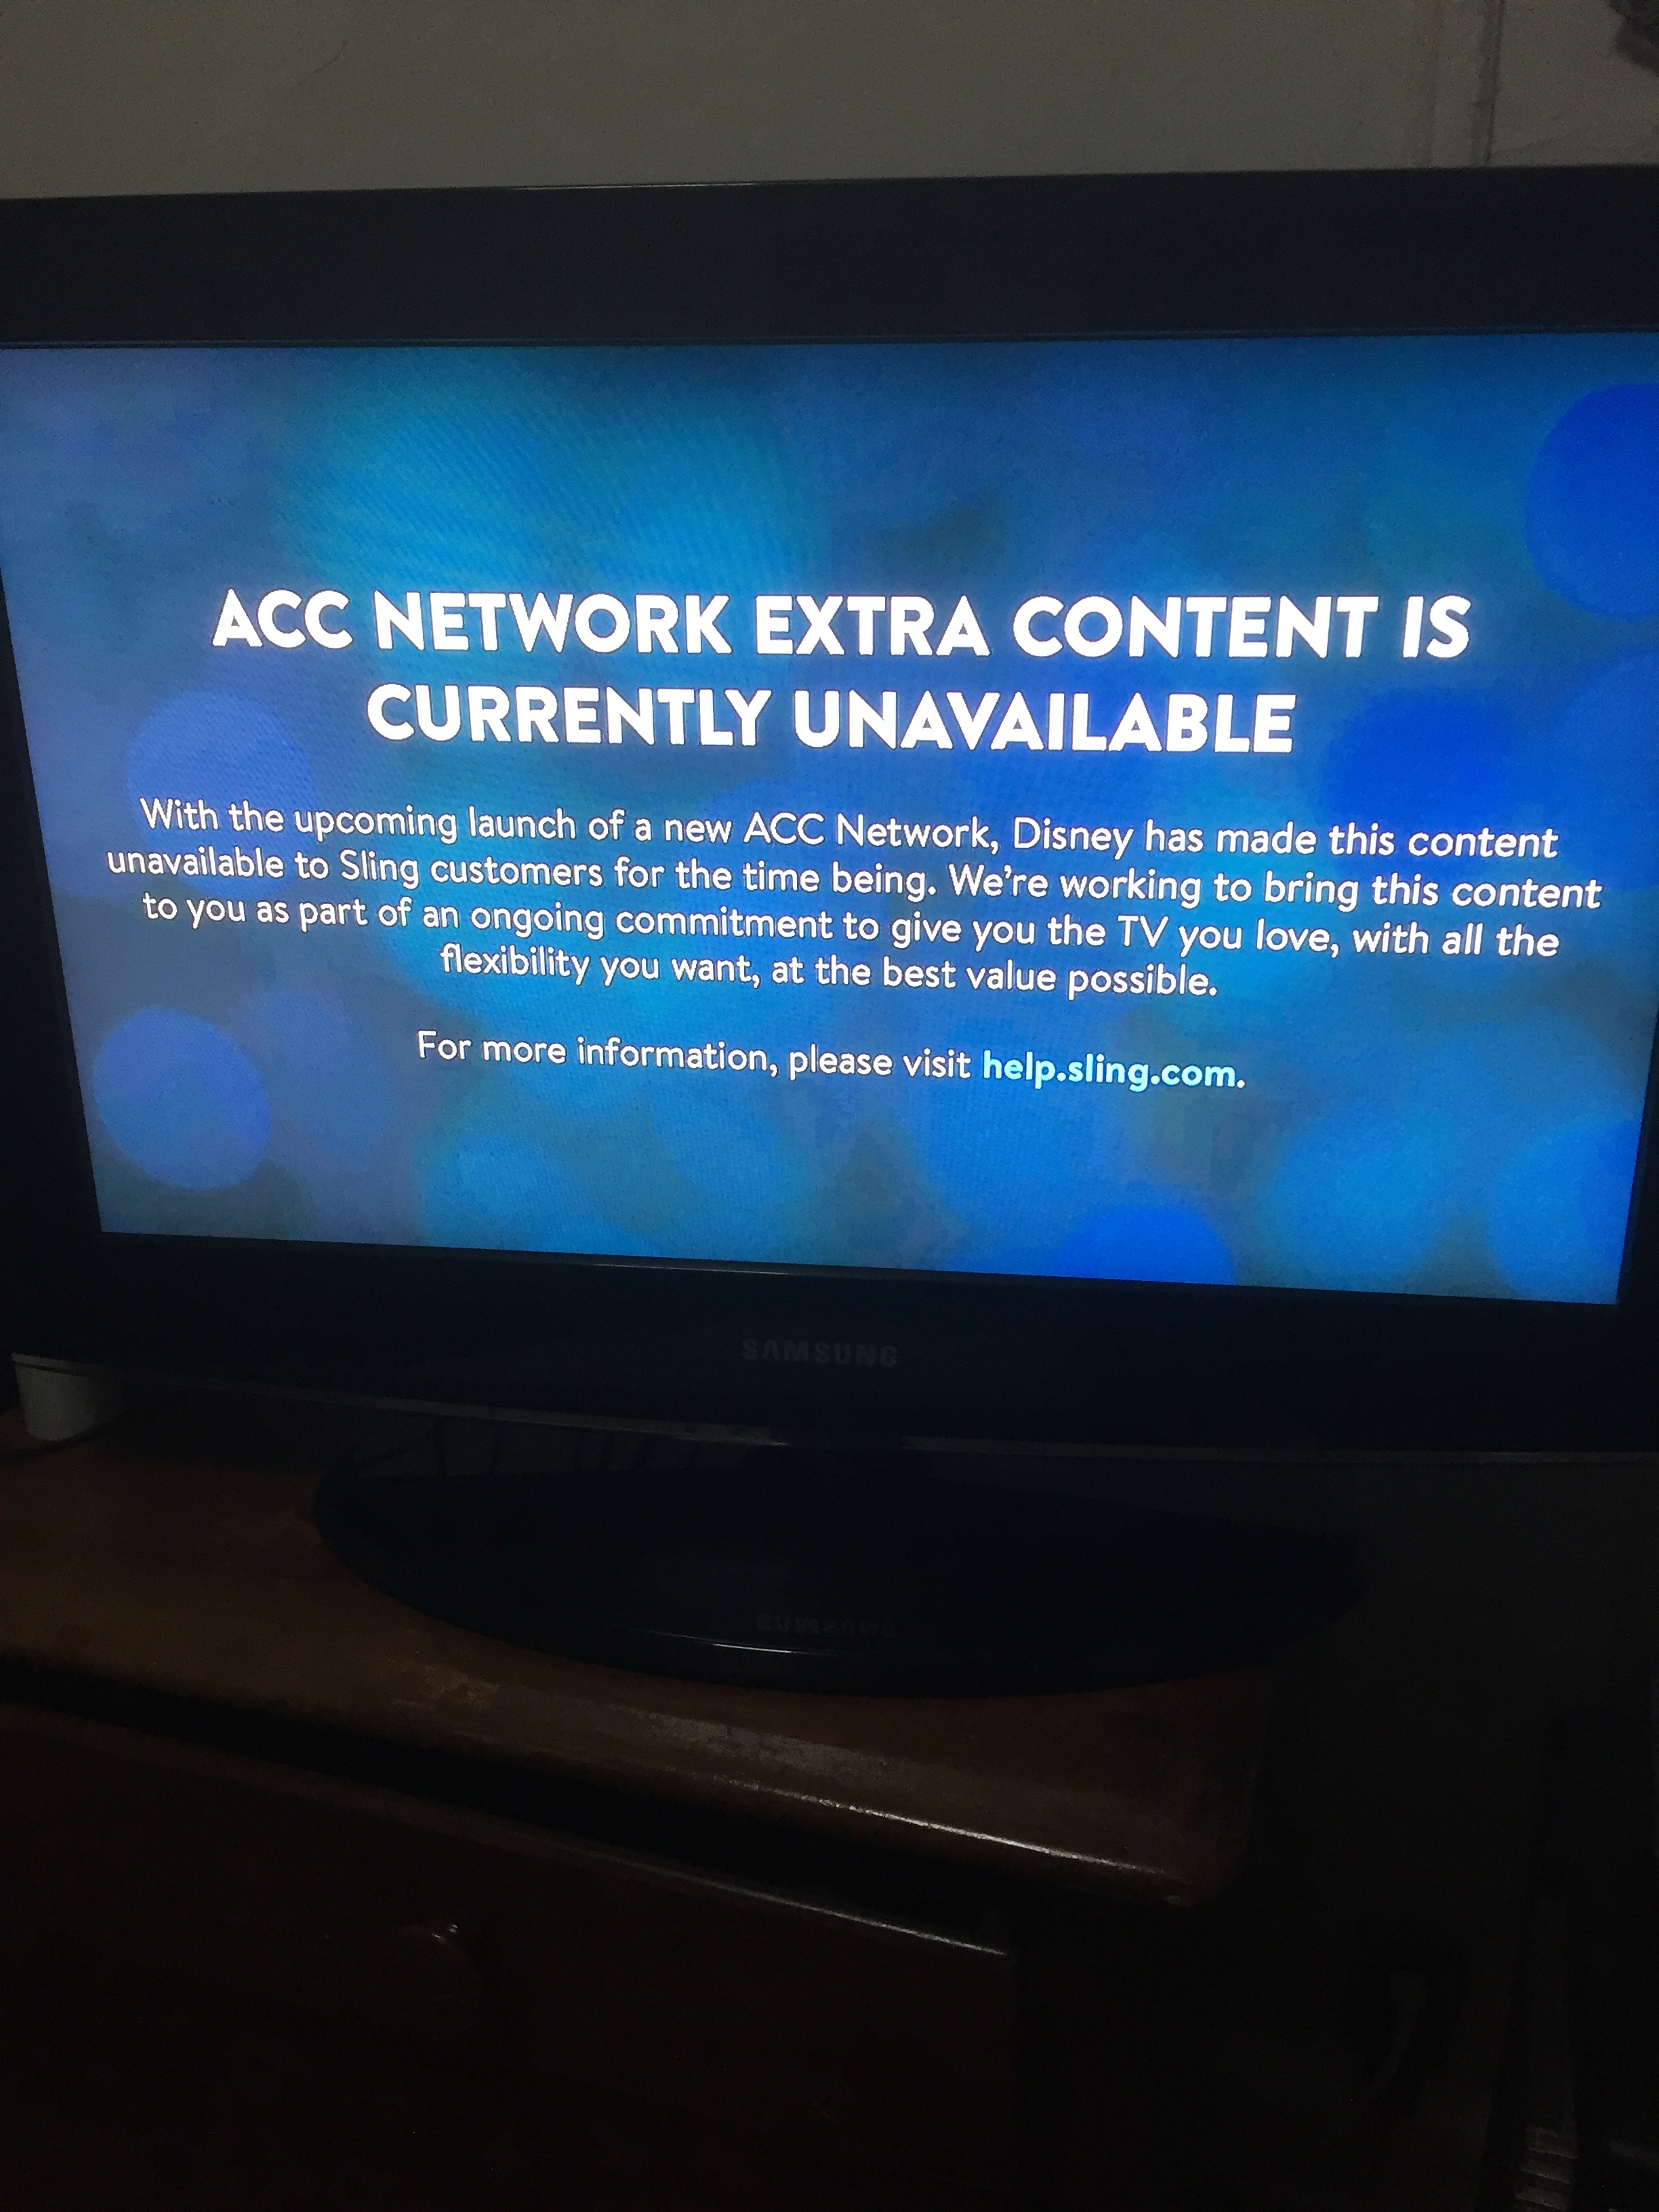 Appleosophy|Sling TV Could Lose ACCNX If New Deal is Not Reached Soon